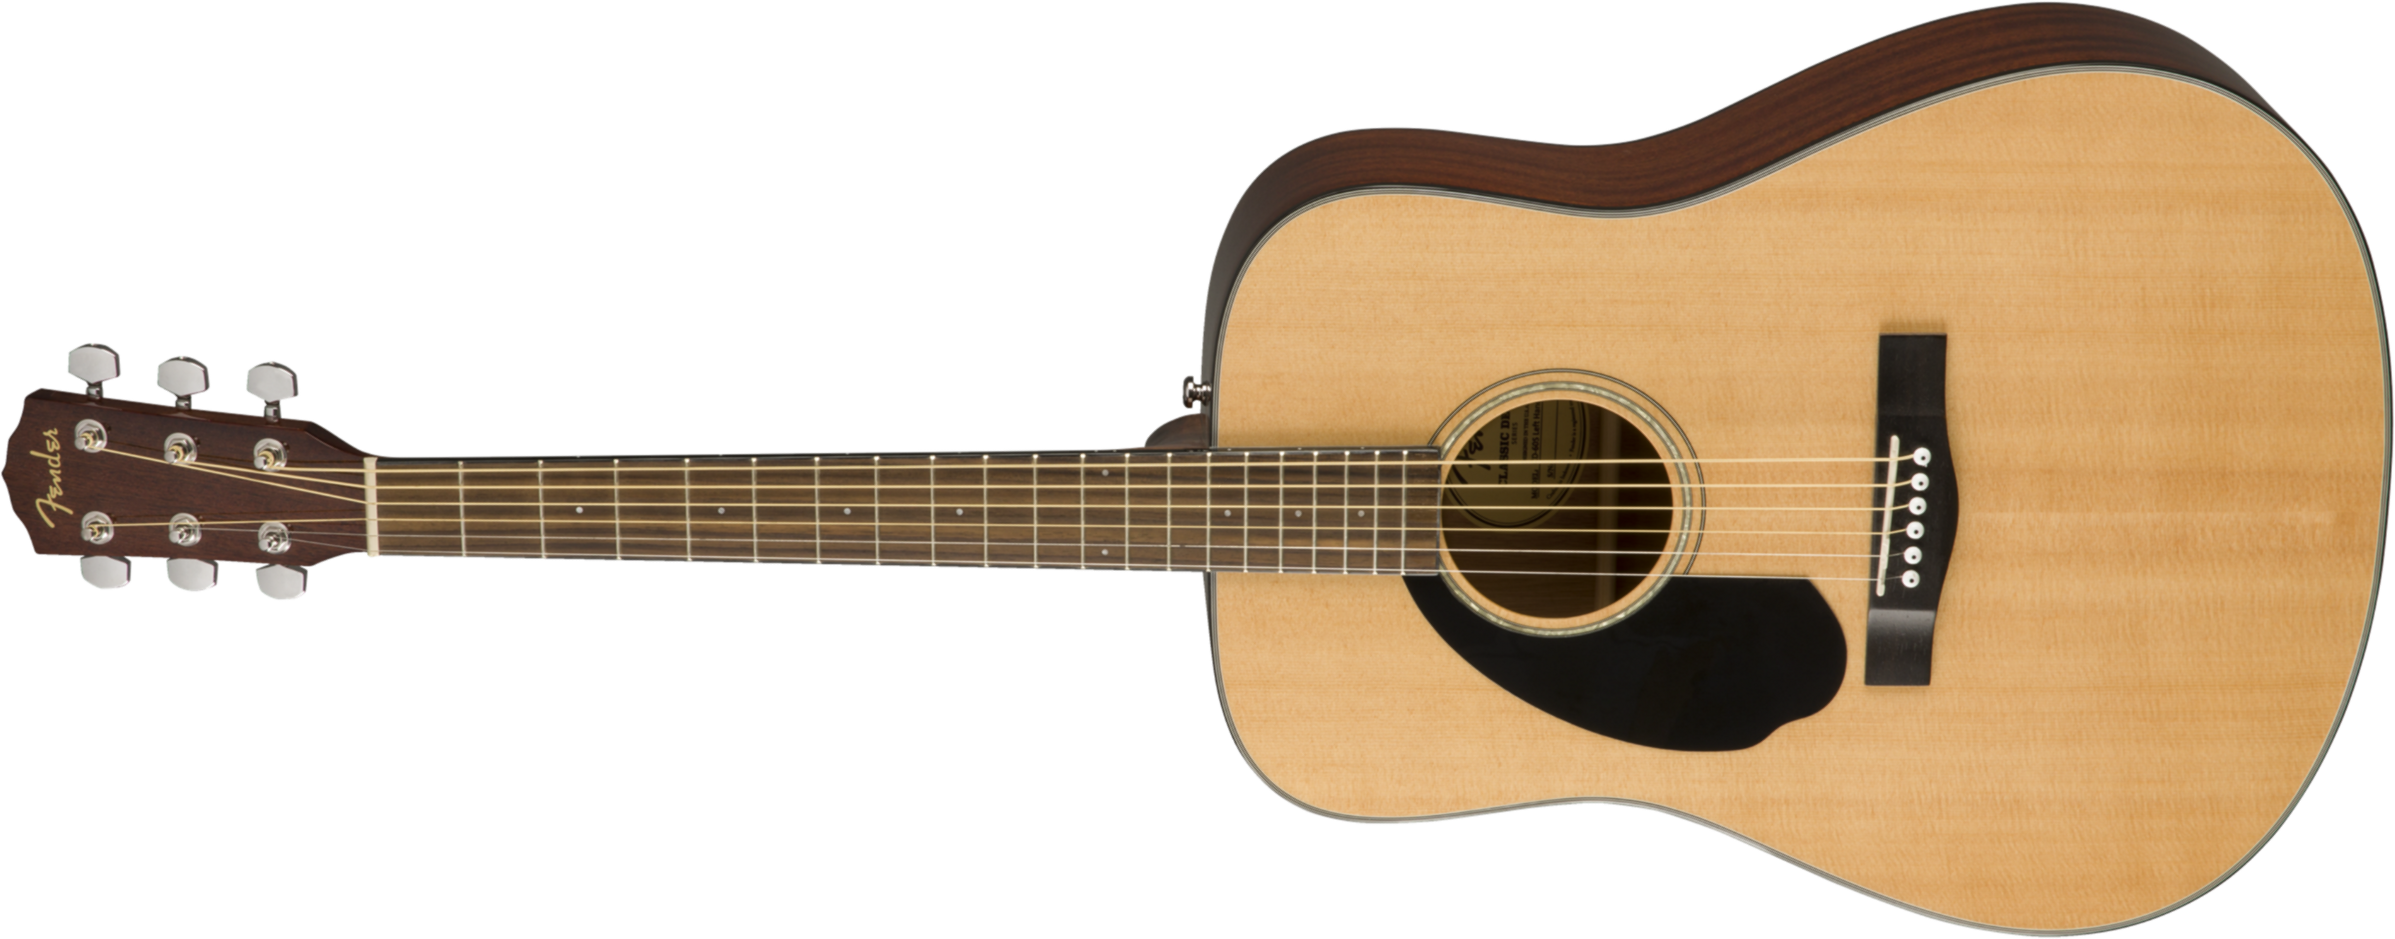 Fender Cd60s Lh Gaucher Dreadnought Wal - Naturel - Acoustic guitar & electro - Main picture